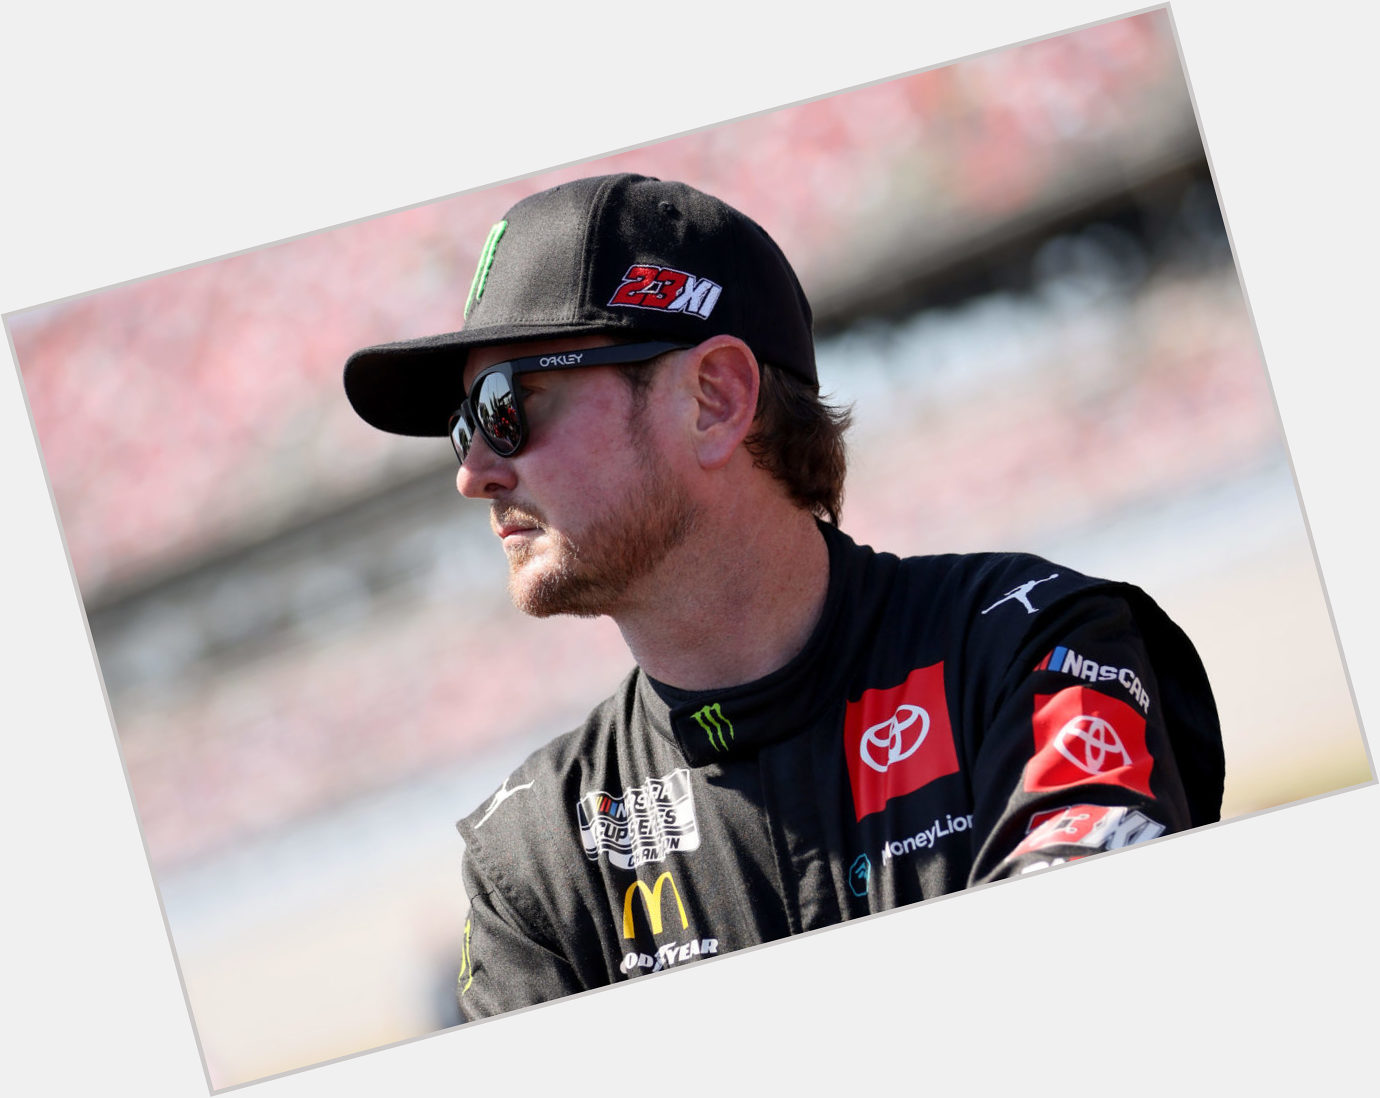 Happy birthday to Kurt Busch, one of the best drivers in NASCAR and a great personality. 